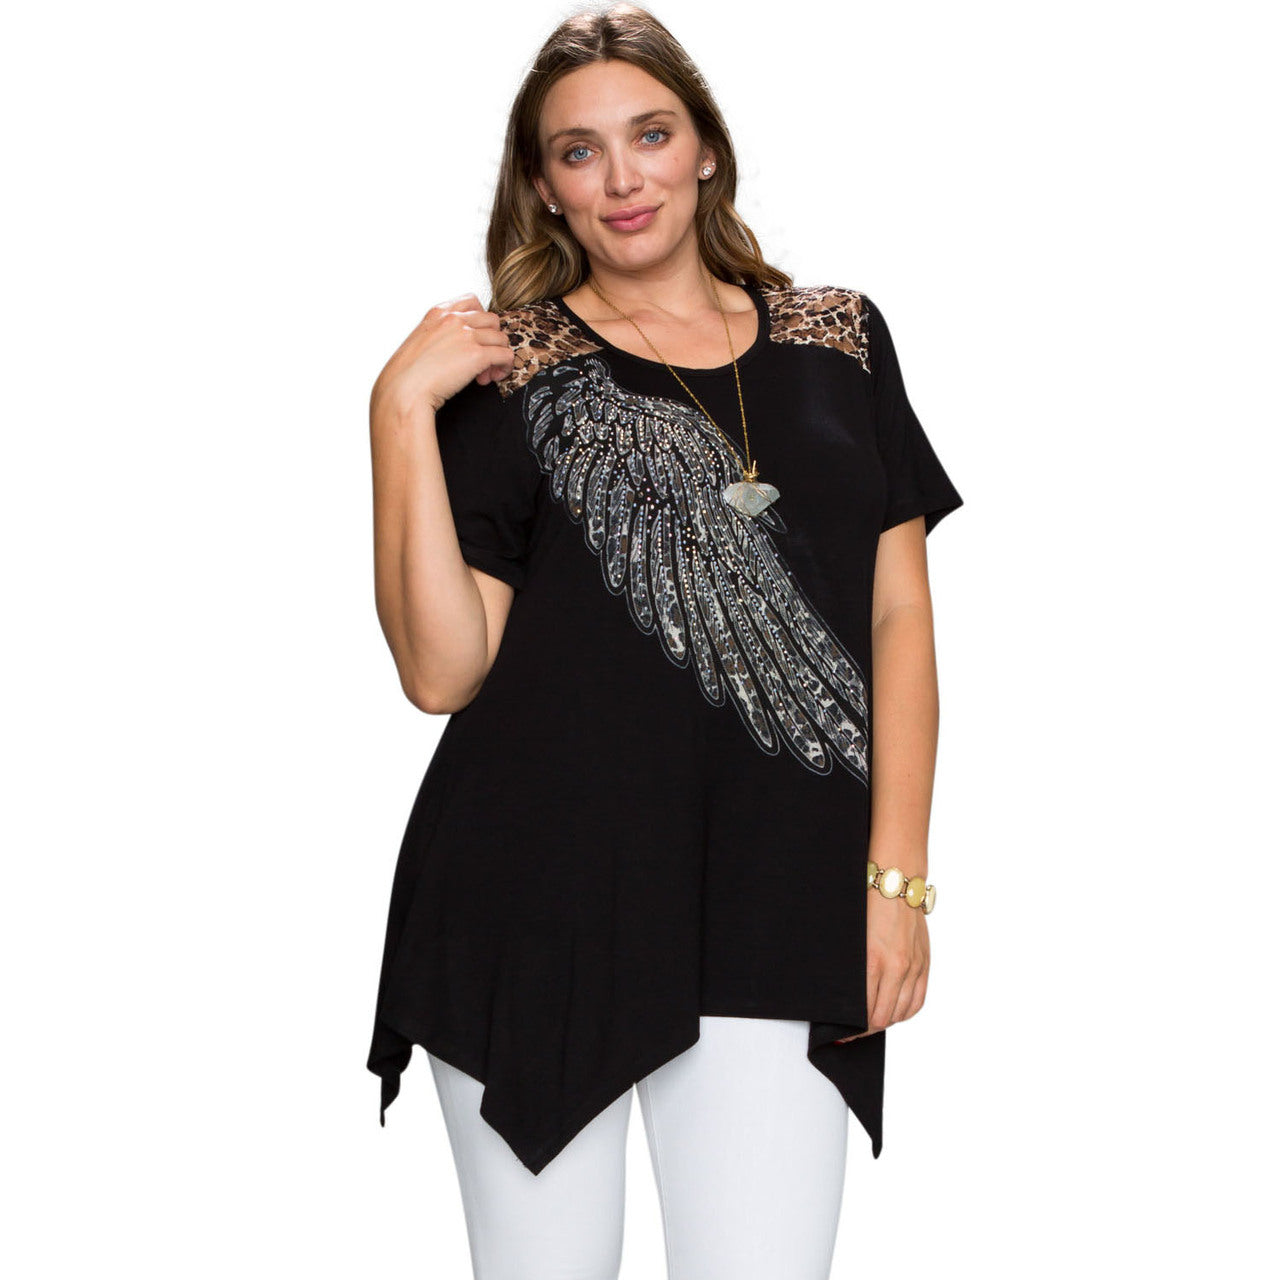 PLUS SIZE Vocal Apparel Wing Print TOP w/ Animal Print LACE Back